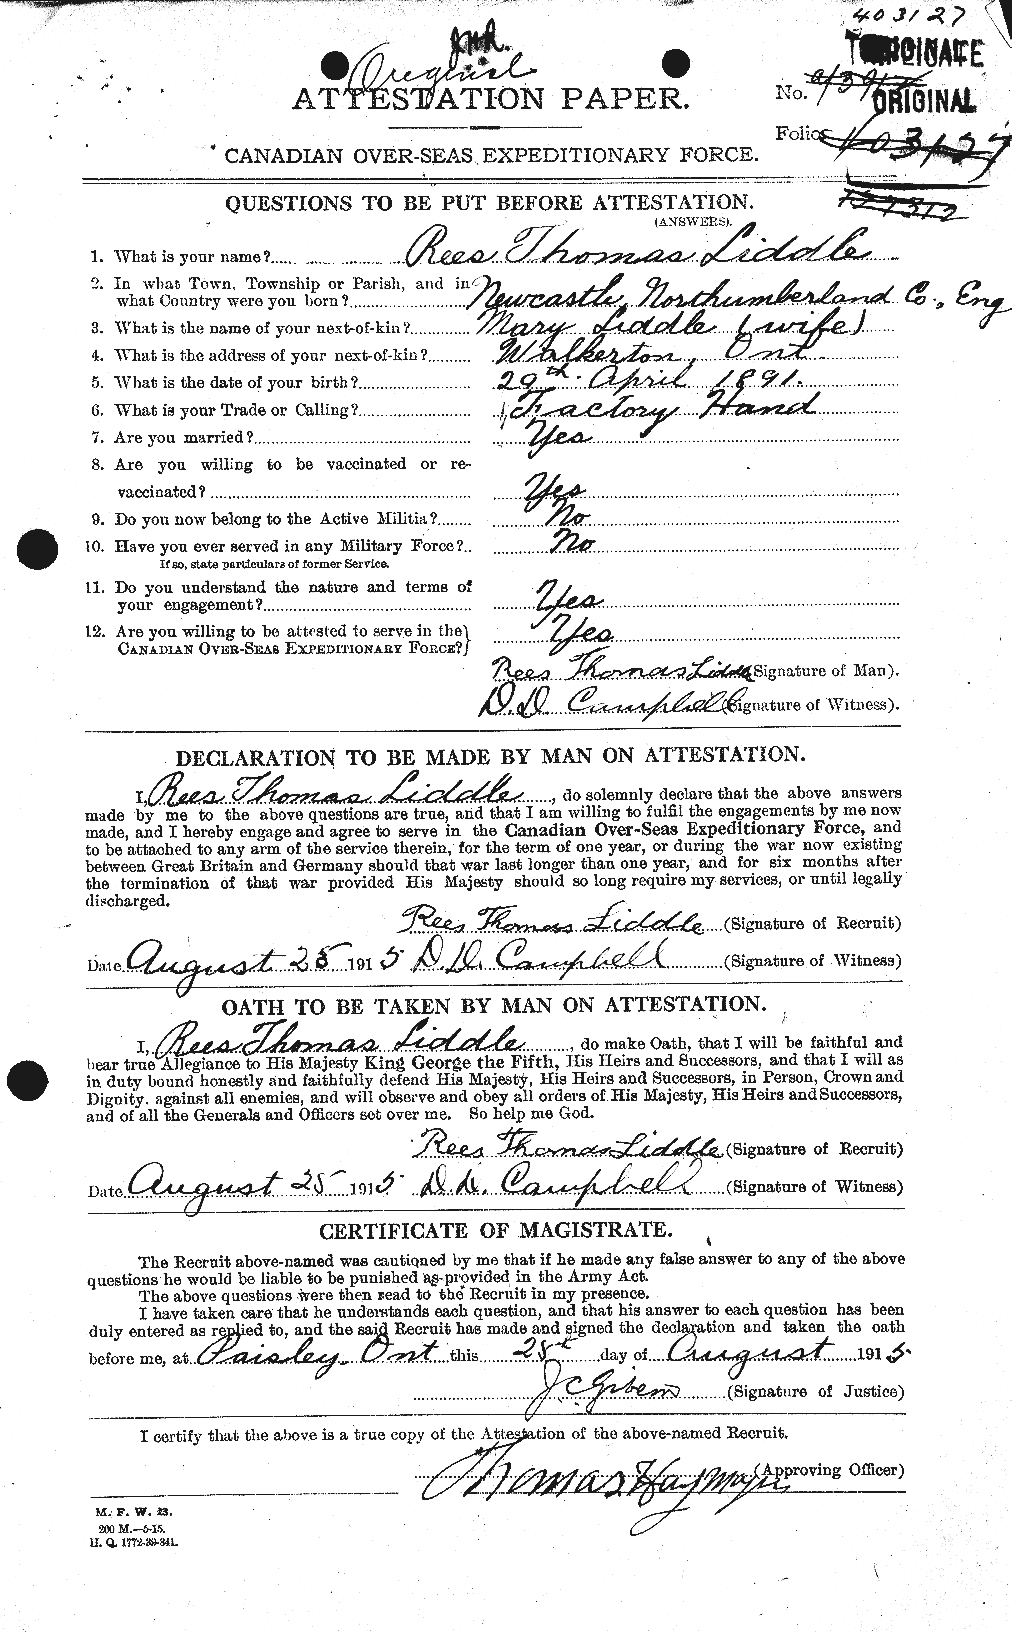 Personnel Records of the First World War - CEF 465329a